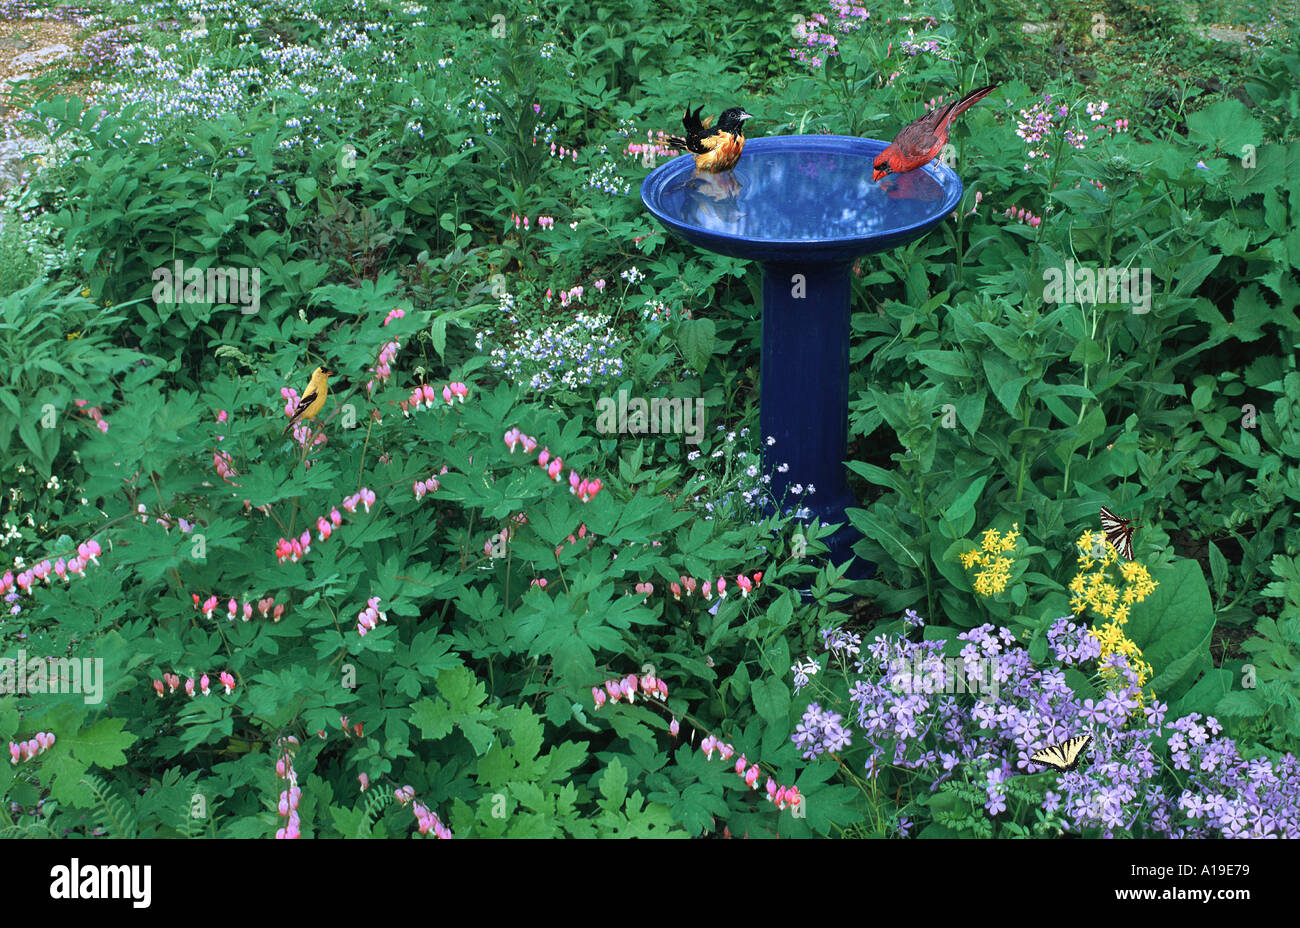 Blue ceramic birdbath with two colorful birds, Baltimore Oriole and Cardinal, bathing in spring shade garden with swallowtail butterfly, Missouri USA Stock Photo